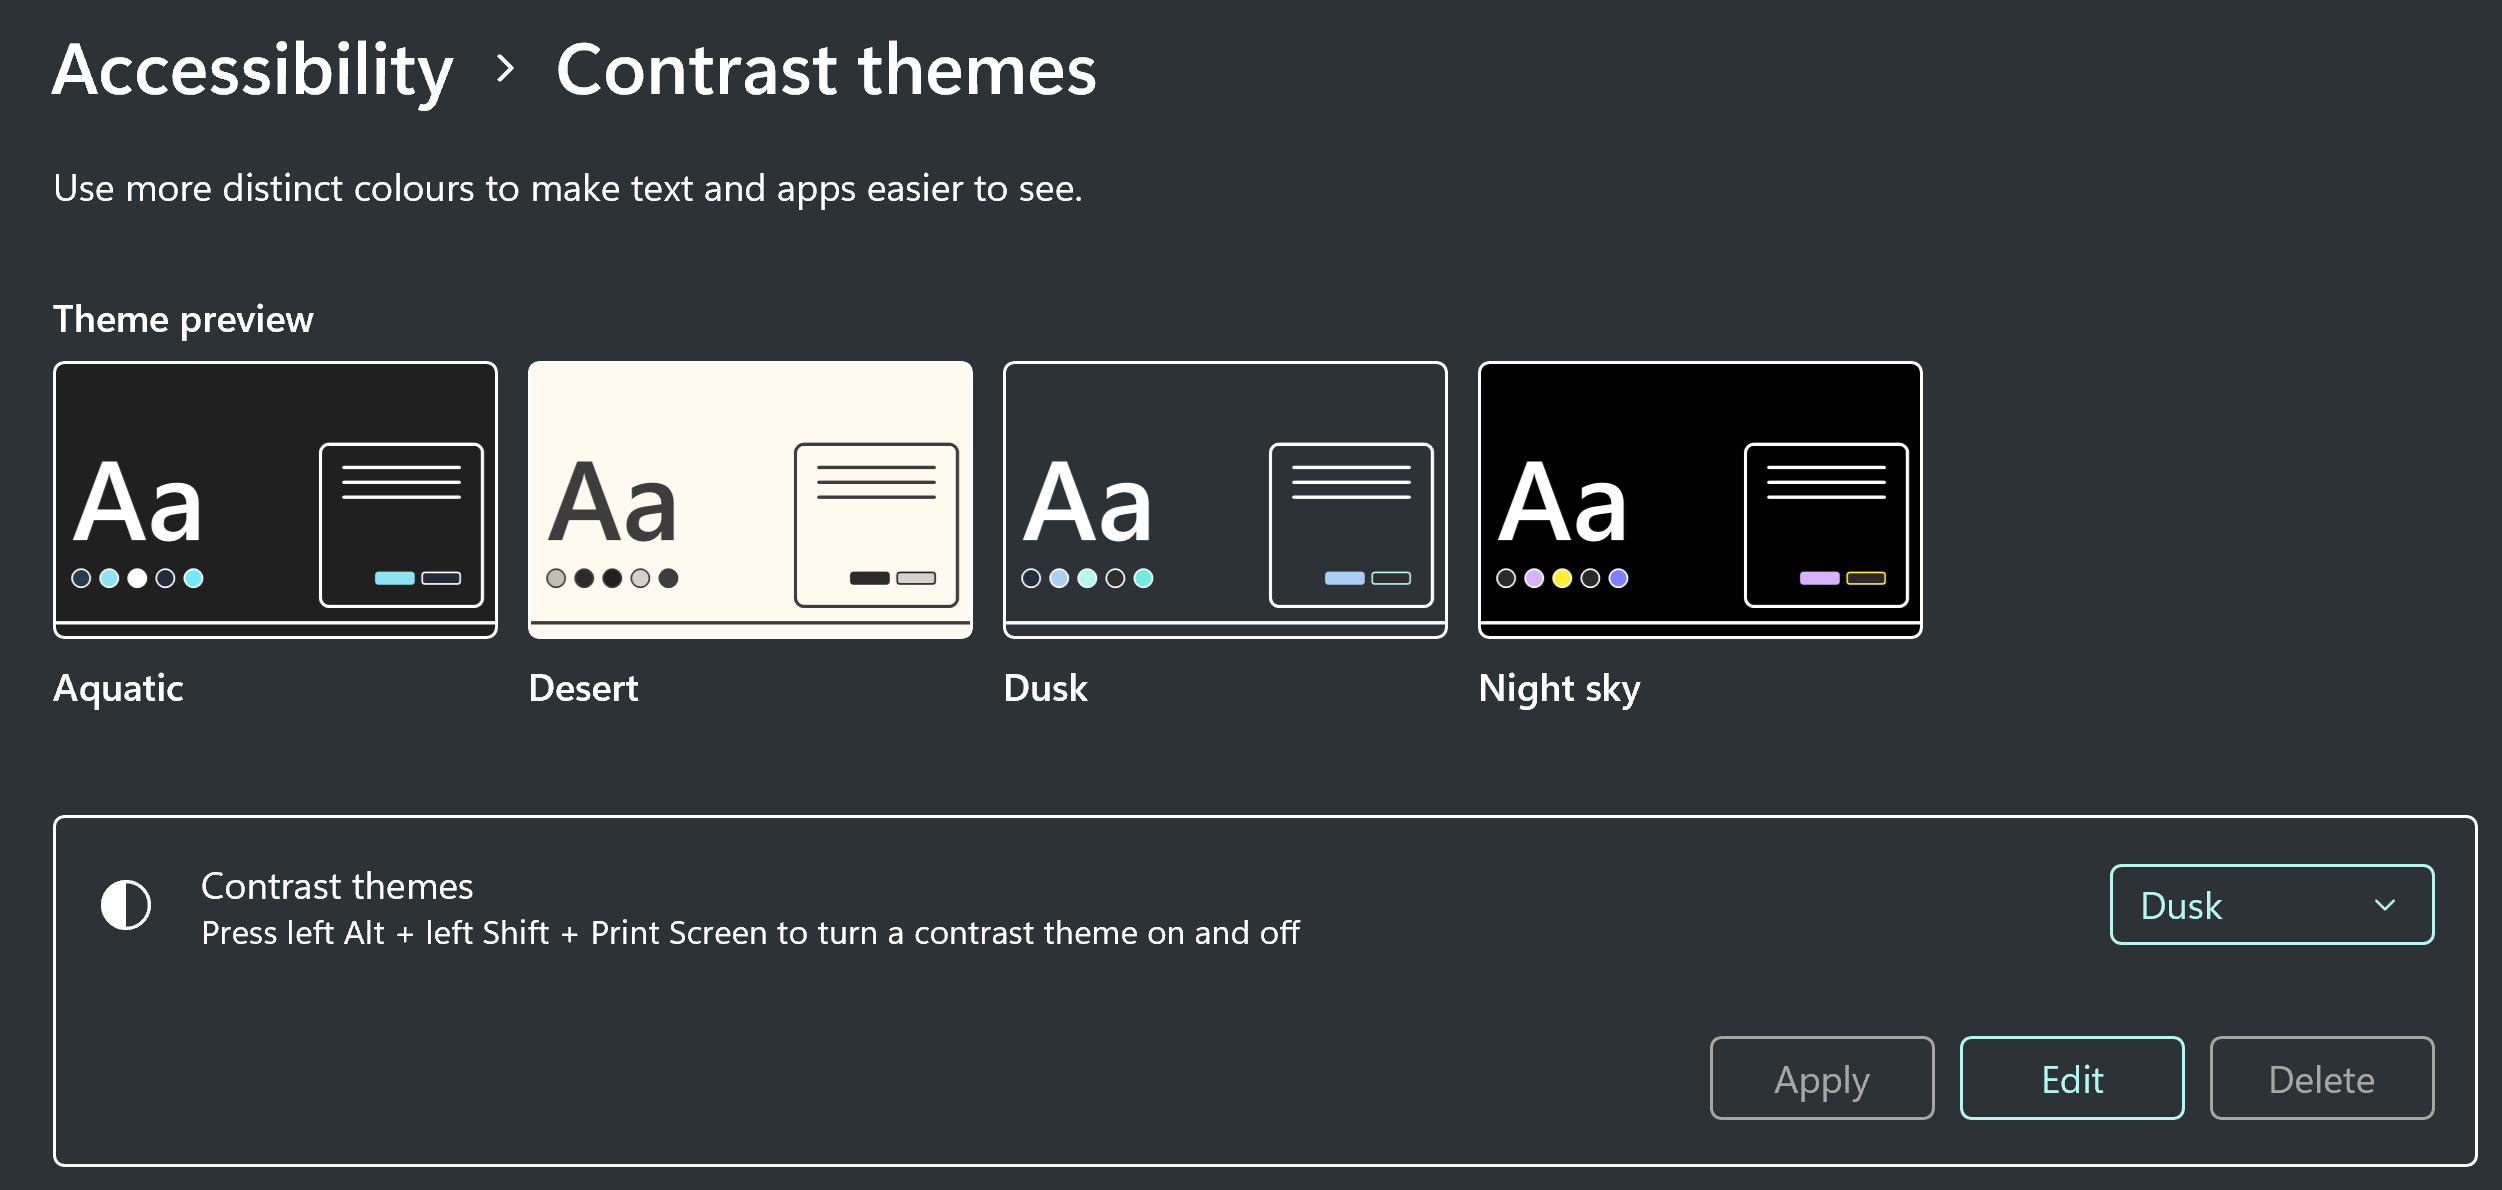 Dusk contrast theme, which makes the background dark grey and the text white